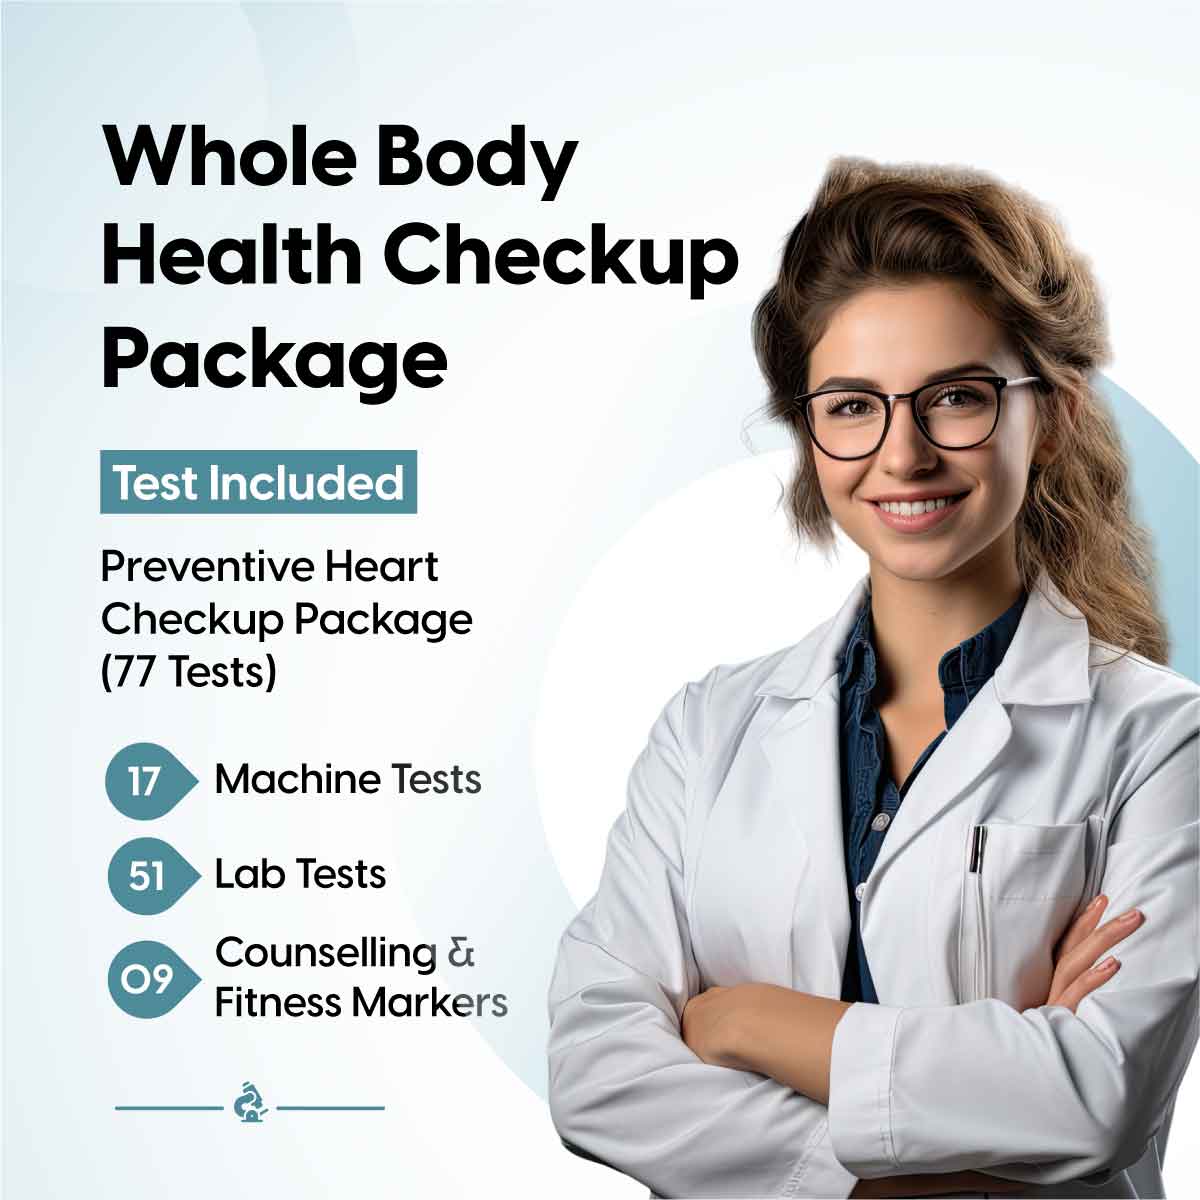 Whole Body Health Checkup Package